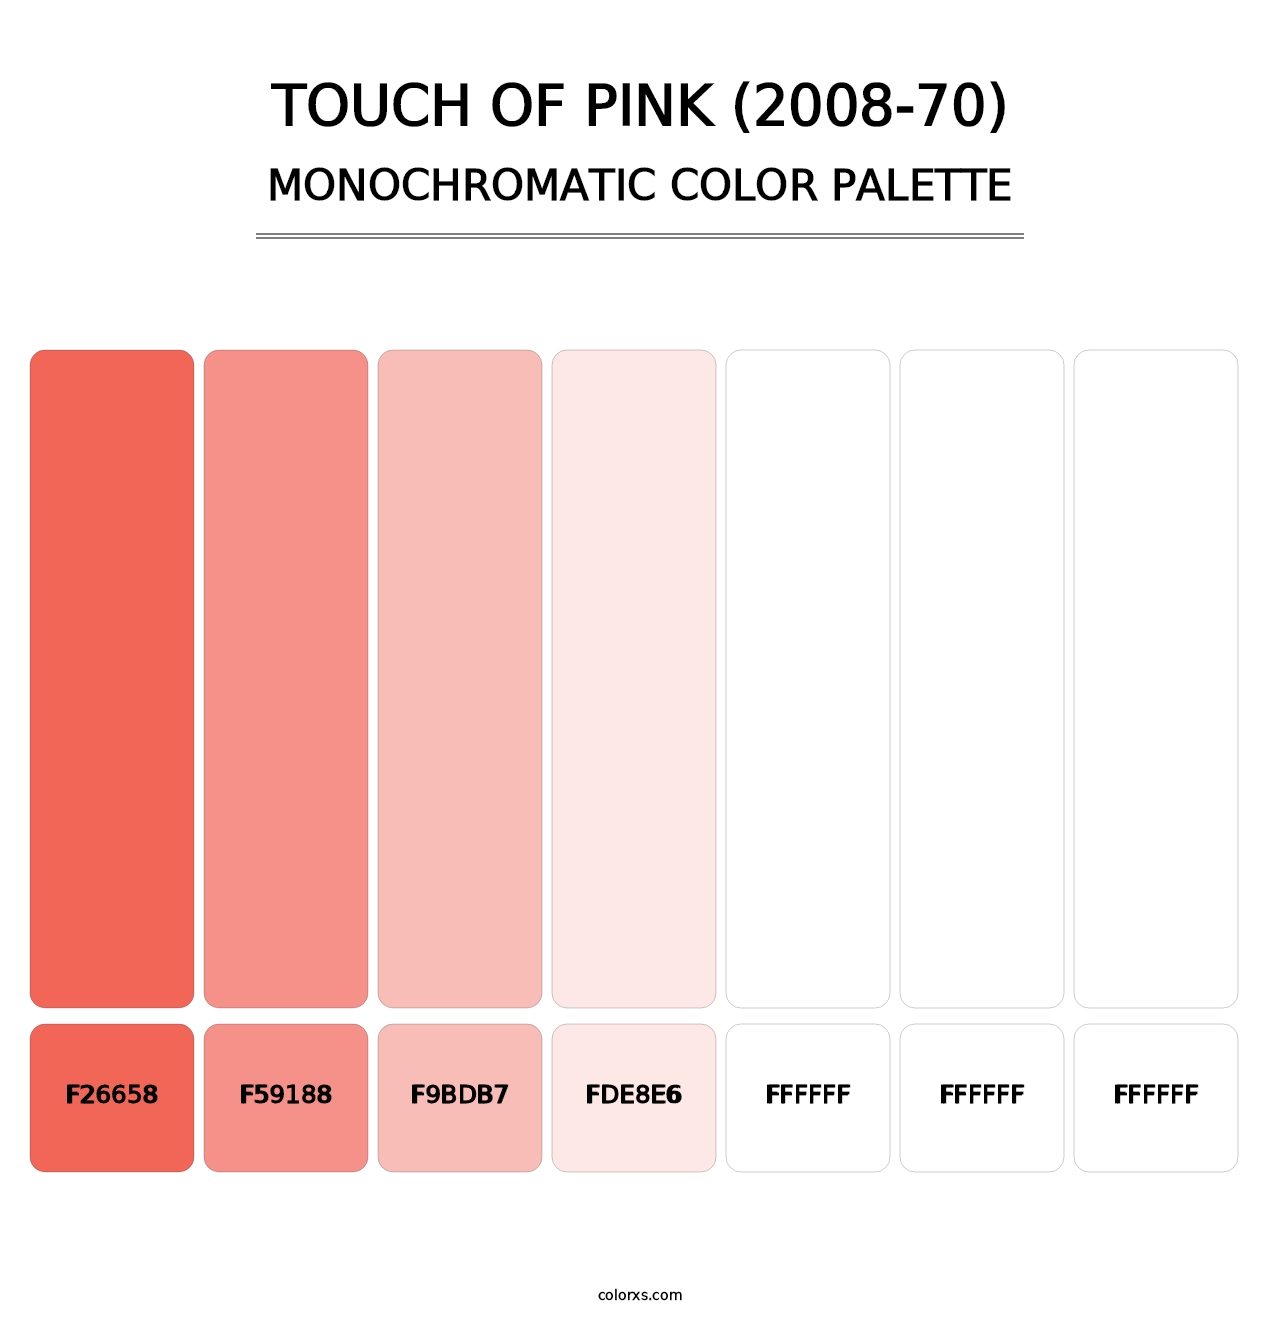 Touch of Pink (2008-70) - Monochromatic Color Palette